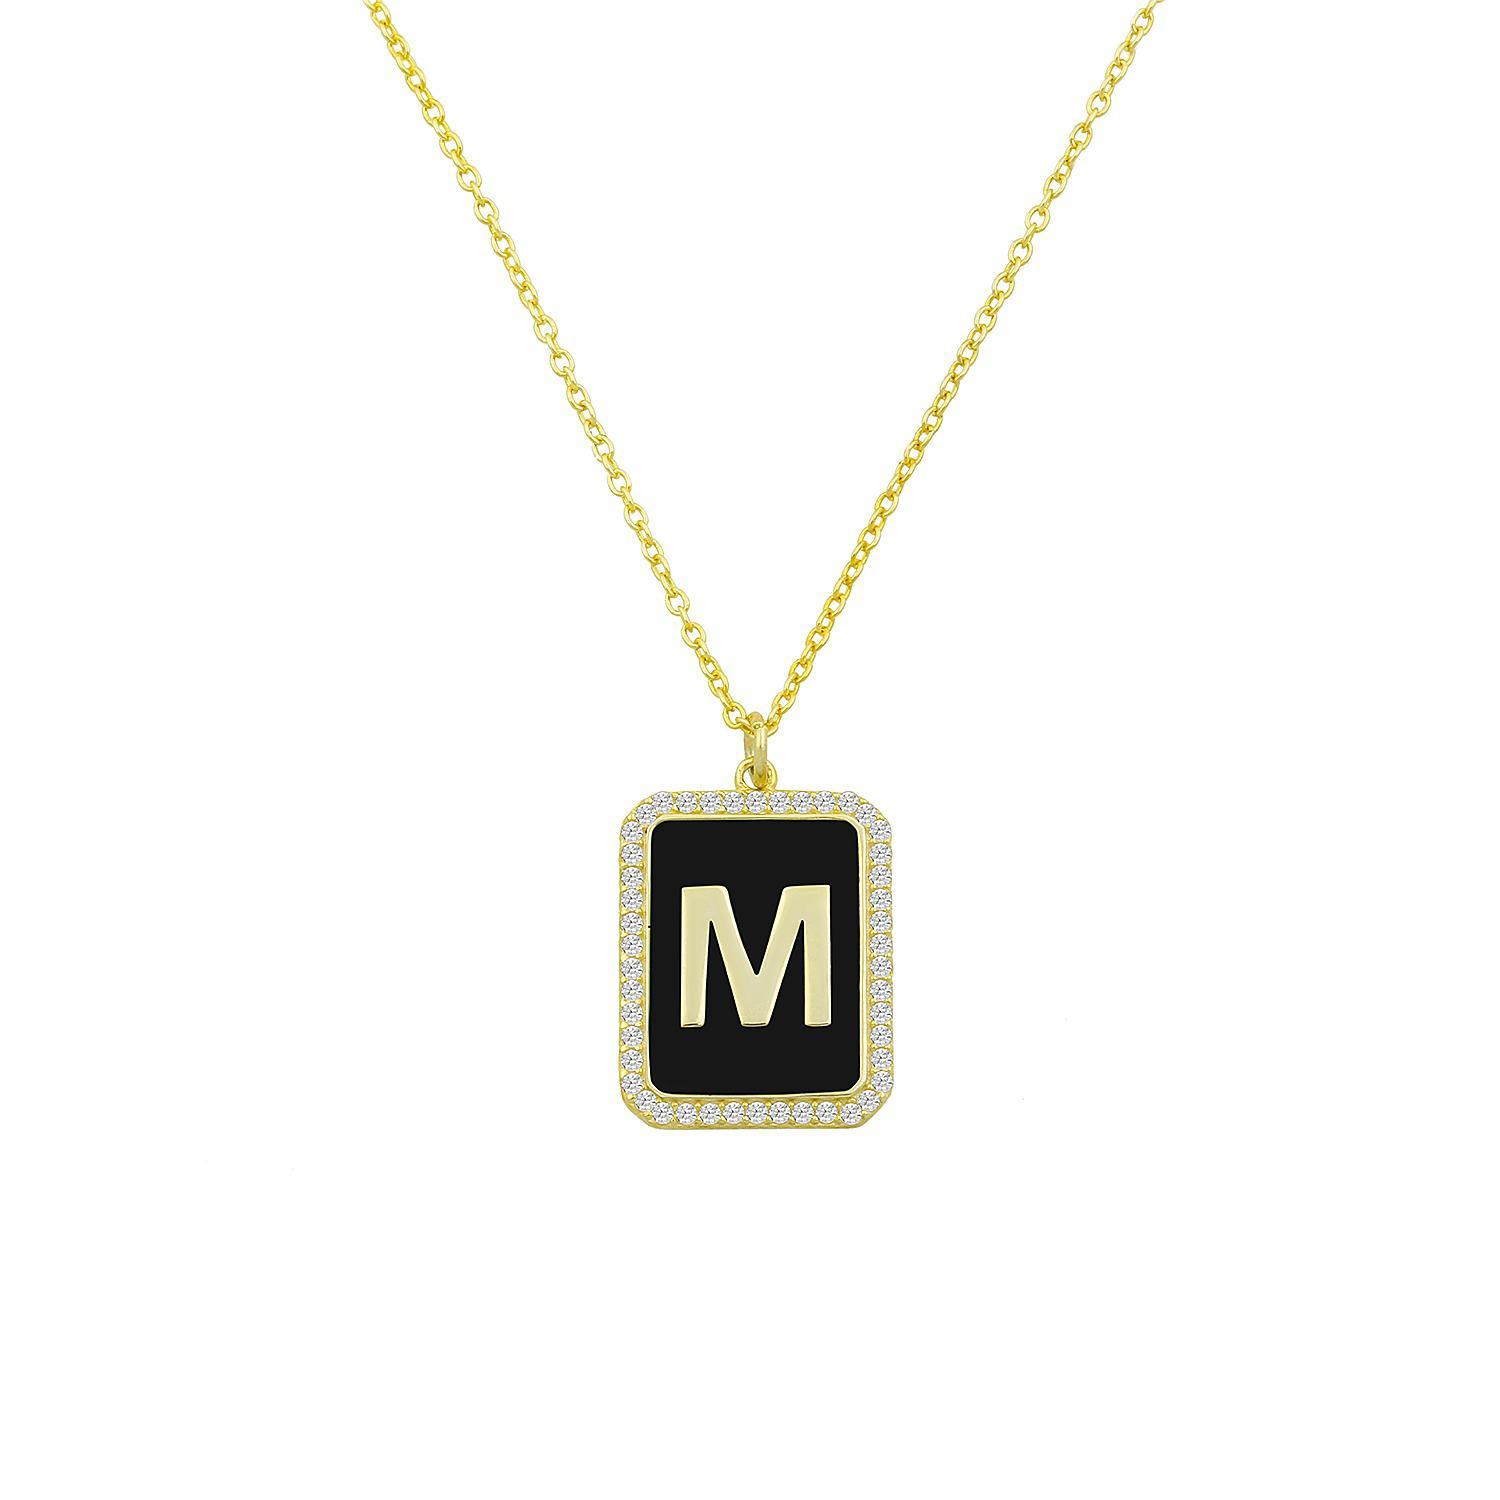 Square Pendant Initial Necklace in Black & Gold JEWELRY The Sis Kiss